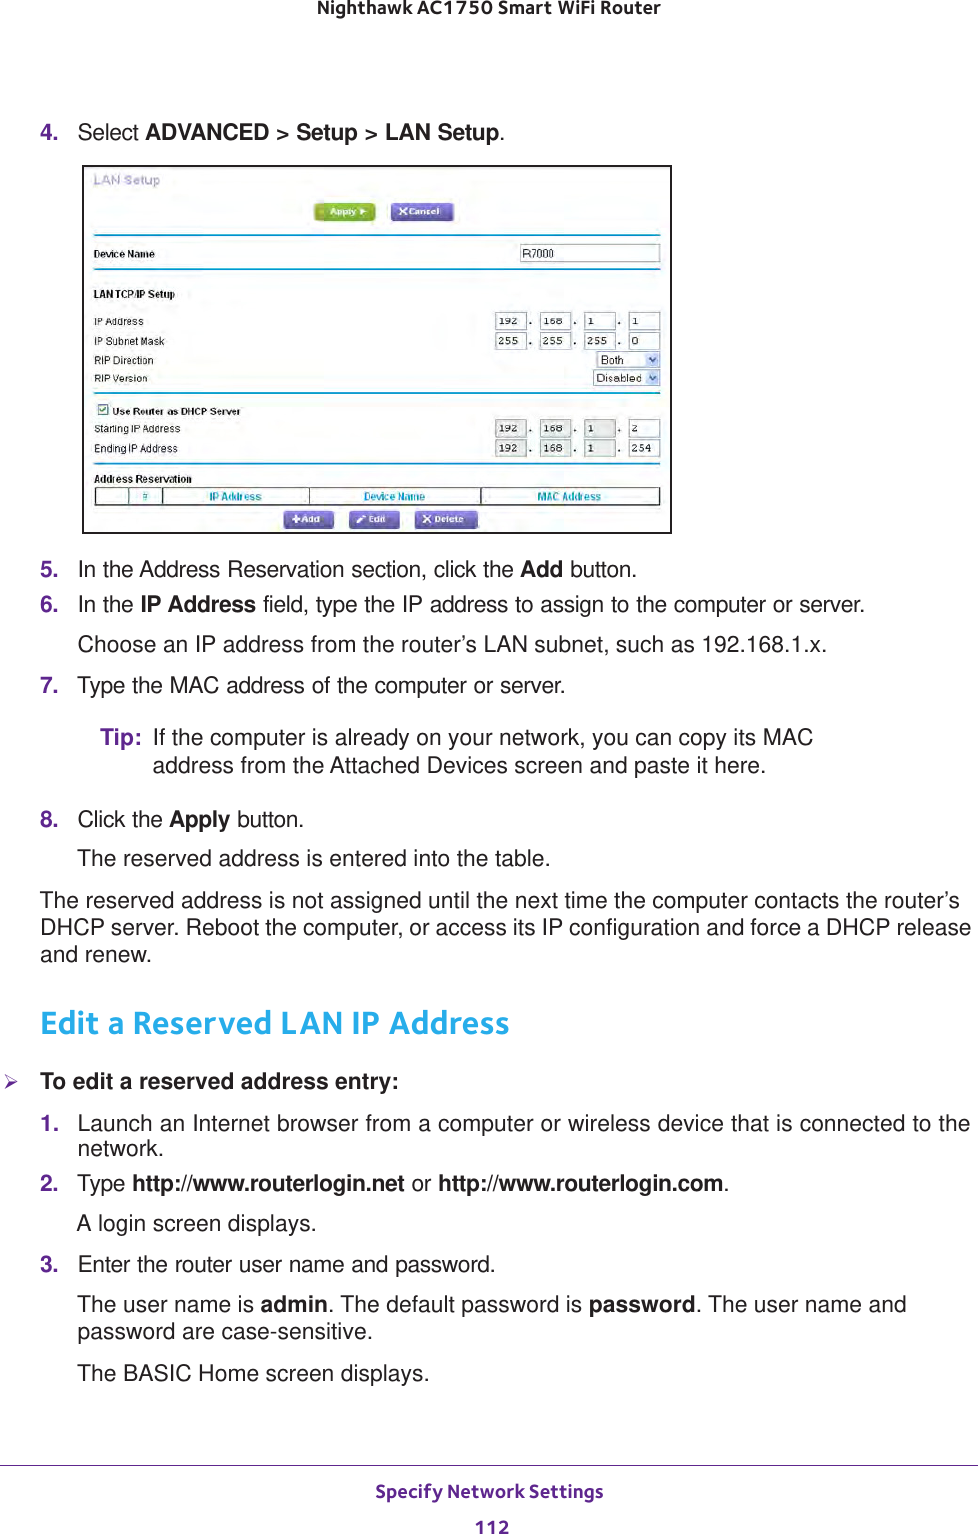 Specify Network Settings 112Nighthawk AC1750 Smart WiFi Router 4.  Select ADVANCED &gt; Setup &gt; LAN Setup.5.  In the Address Reservation section, click the Add button. 6.  In the IP Address field, type the IP address to assign to the computer or server. Choose an IP address from the router’s LAN subnet, such as 192.168.1.x. 7.  Type the MAC address of the computer or server.Tip: If the computer is already on your network, you can copy its MAC address from the Attached Devices screen and paste it here.8.  Click the Apply button.The reserved address is entered into the table. The reserved address is not assigned until the next time the computer contacts the router’s DHCP server. Reboot the computer, or access its IP configuration and force a DHCP release and renew.Edit a Reserved LAN IP AddressTo edit a reserved address entry:1.  Launch an Internet browser from a computer or wireless device that is connected to the network.2.  Type http://www.routerlogin.net or http://www.routerlogin.com.A login screen displays.3.  Enter the router user name and password.The user name is admin. The default password is password. The user name and password are case-sensitive.The BASIC Home screen displays.